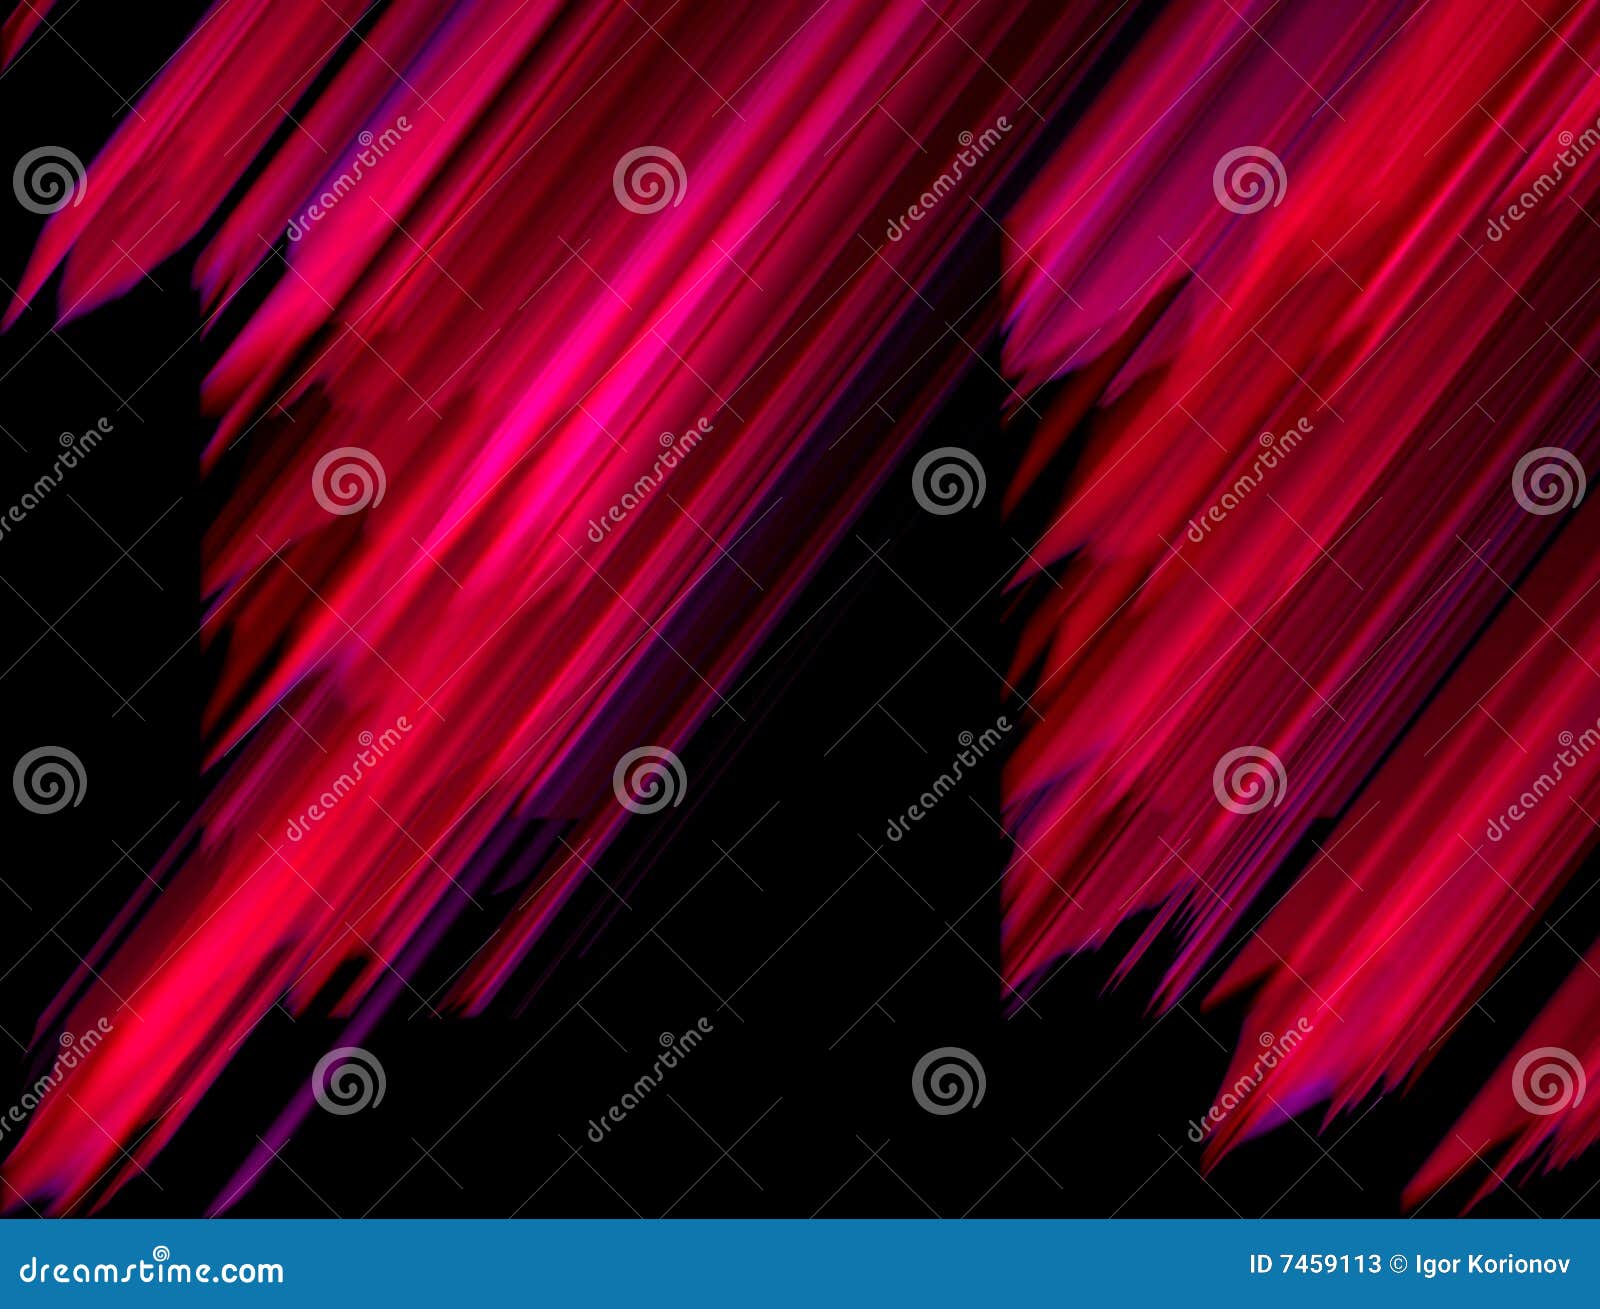 abstract background with slanting red lines